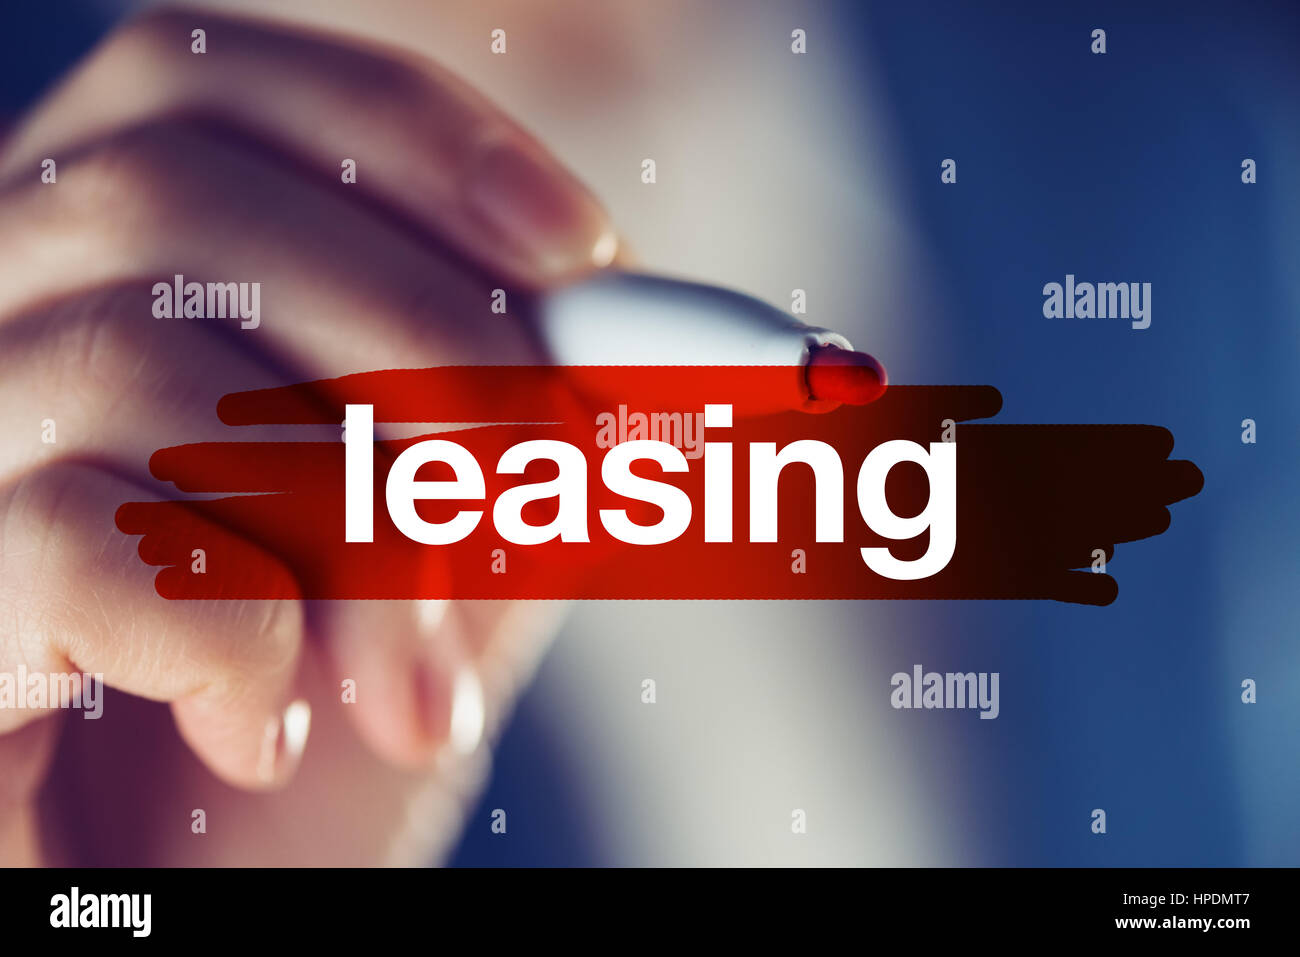 Leasing, business concept - businesswoman highlighting word with red marker pen Stock Photo